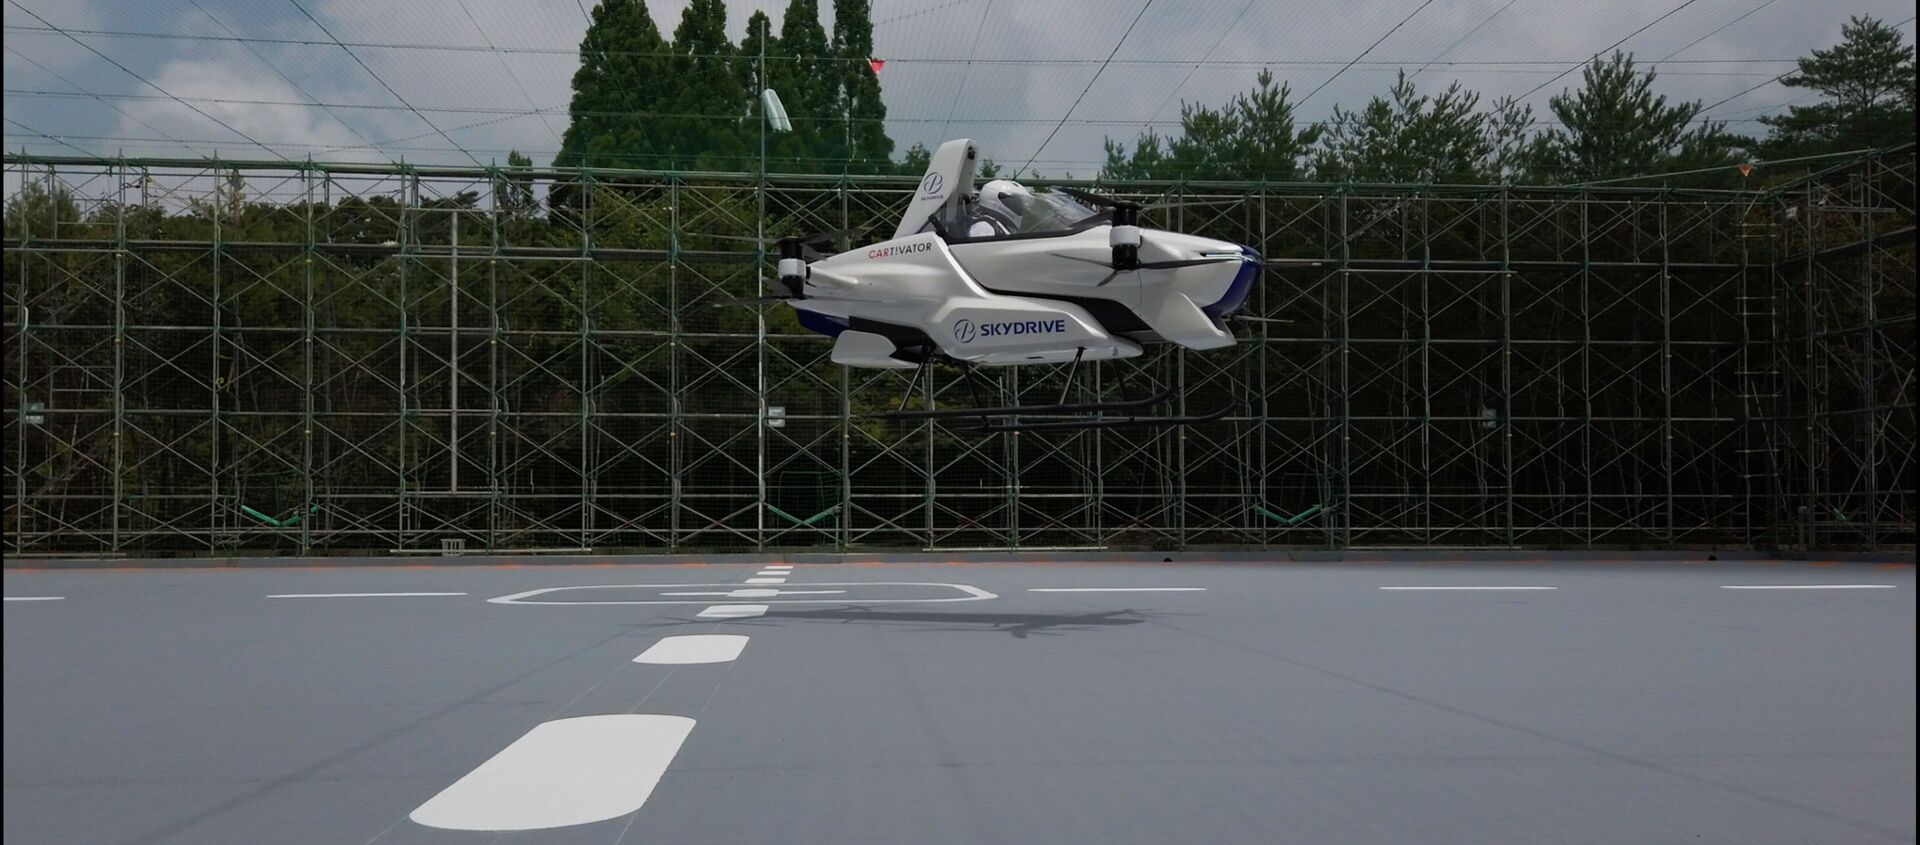 A manned flying car SD-03 is seen during a test flight session at Toyota test field in Toyota, central Japan, in this handout photo taken in August 2020 and released by SkyDrive/CARTIVATOR 2020, and obtained by Reuters August 29, 2020. SkyDrive/CARTIVATOR 2020 - Sputnik International, 1920, 29.08.2020